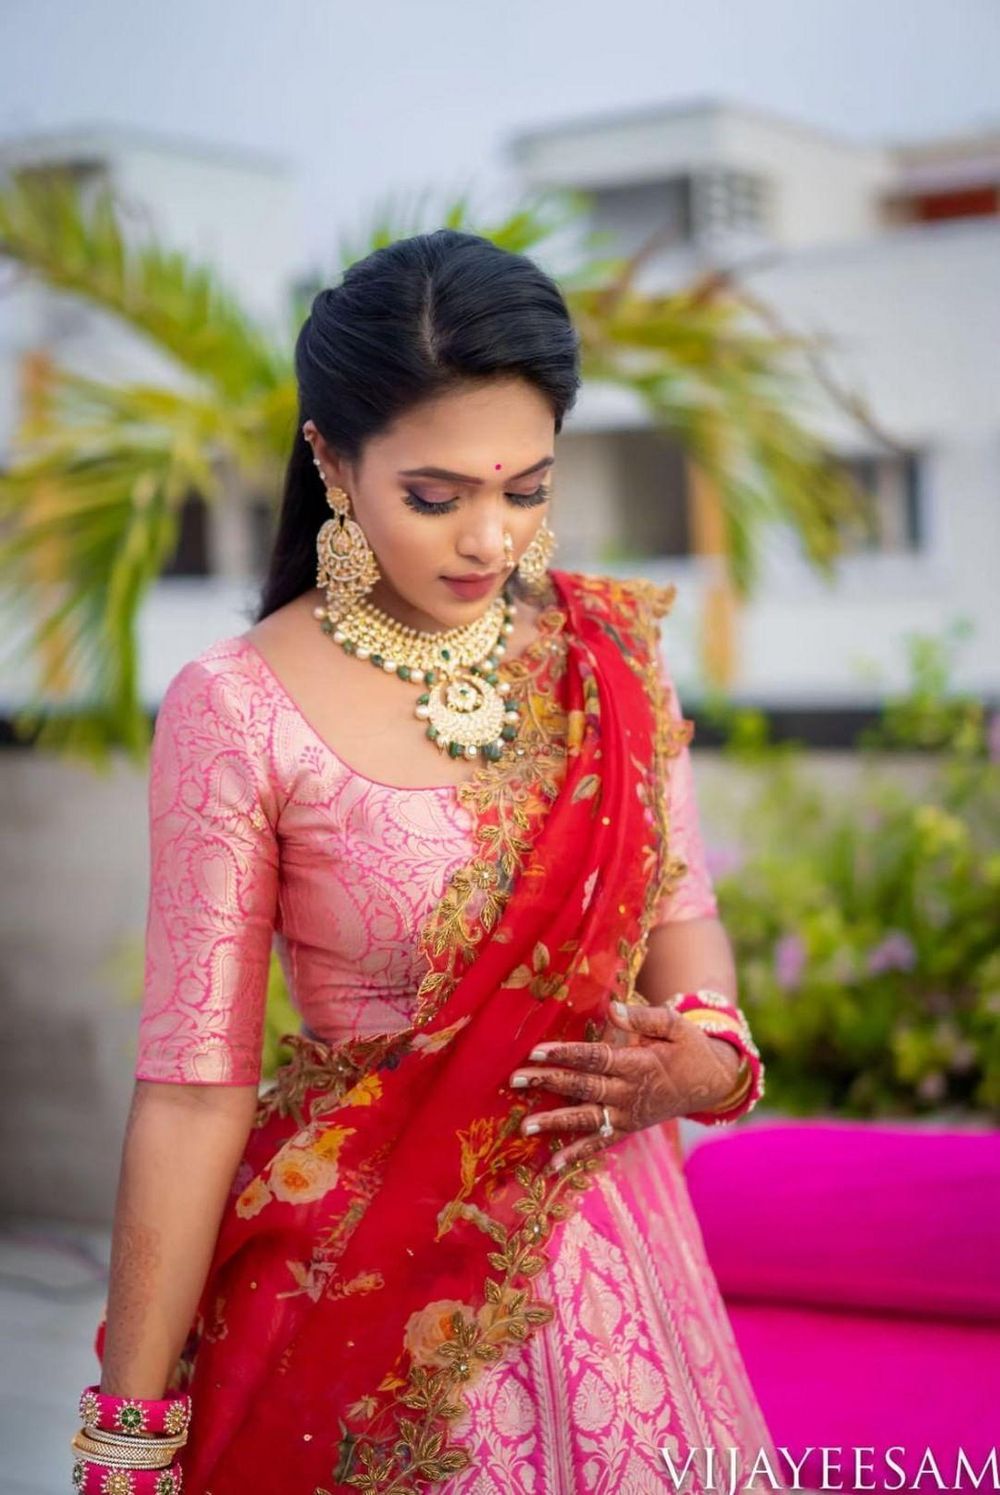 Photo of A bride in a pink lehenga with a contrasting dupatta